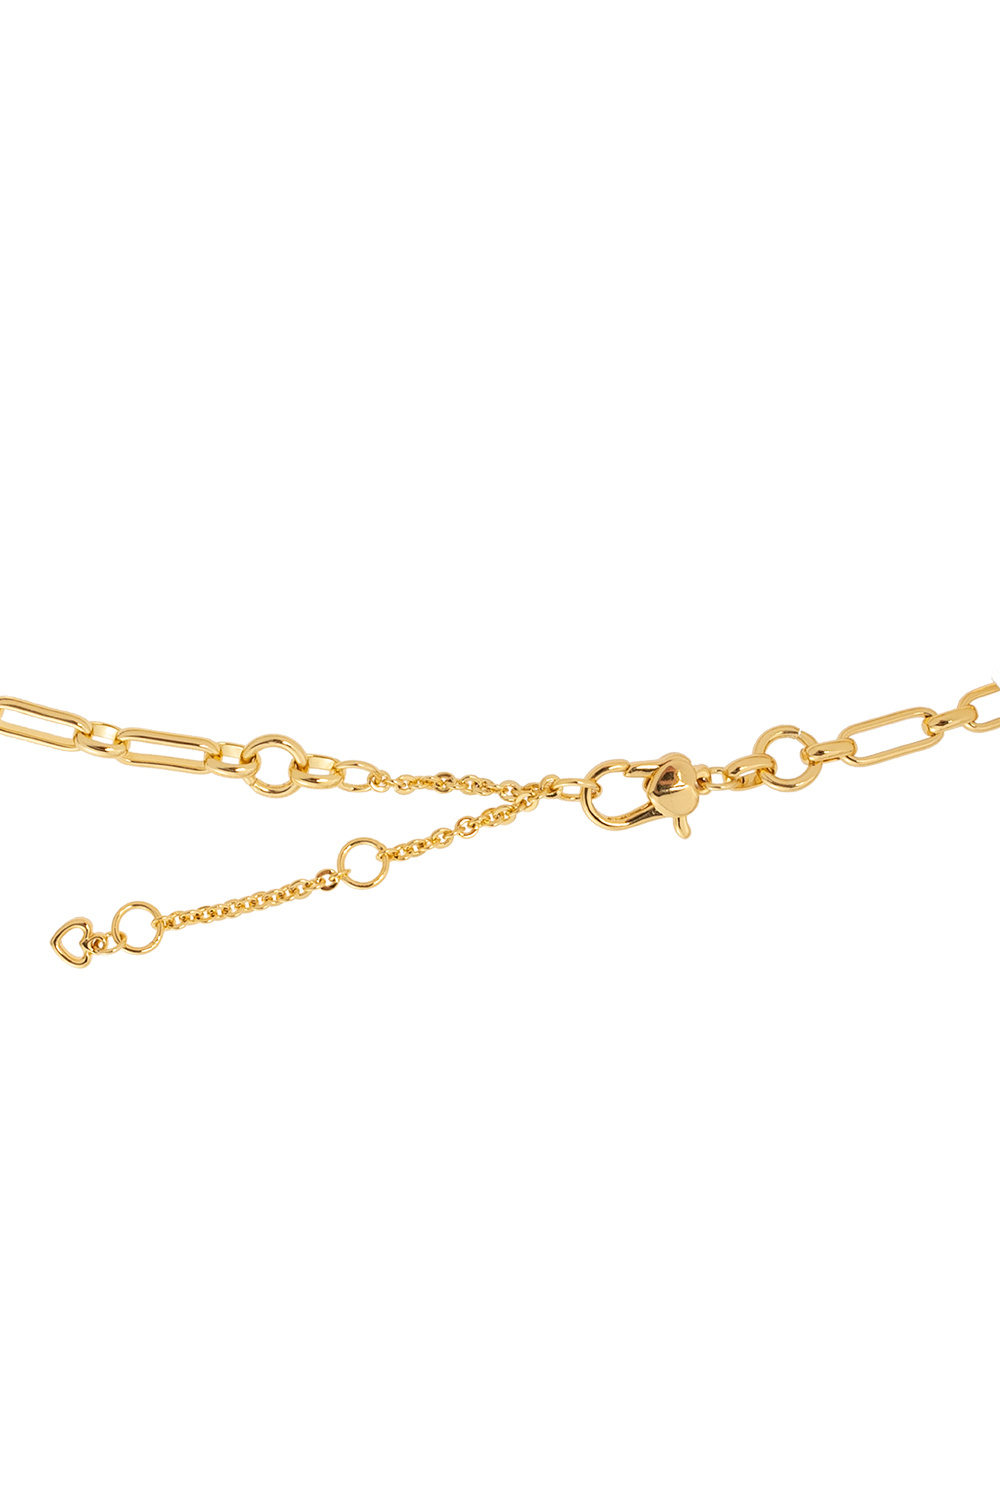 Kate Spade ‘Lock And Spade’ necklace